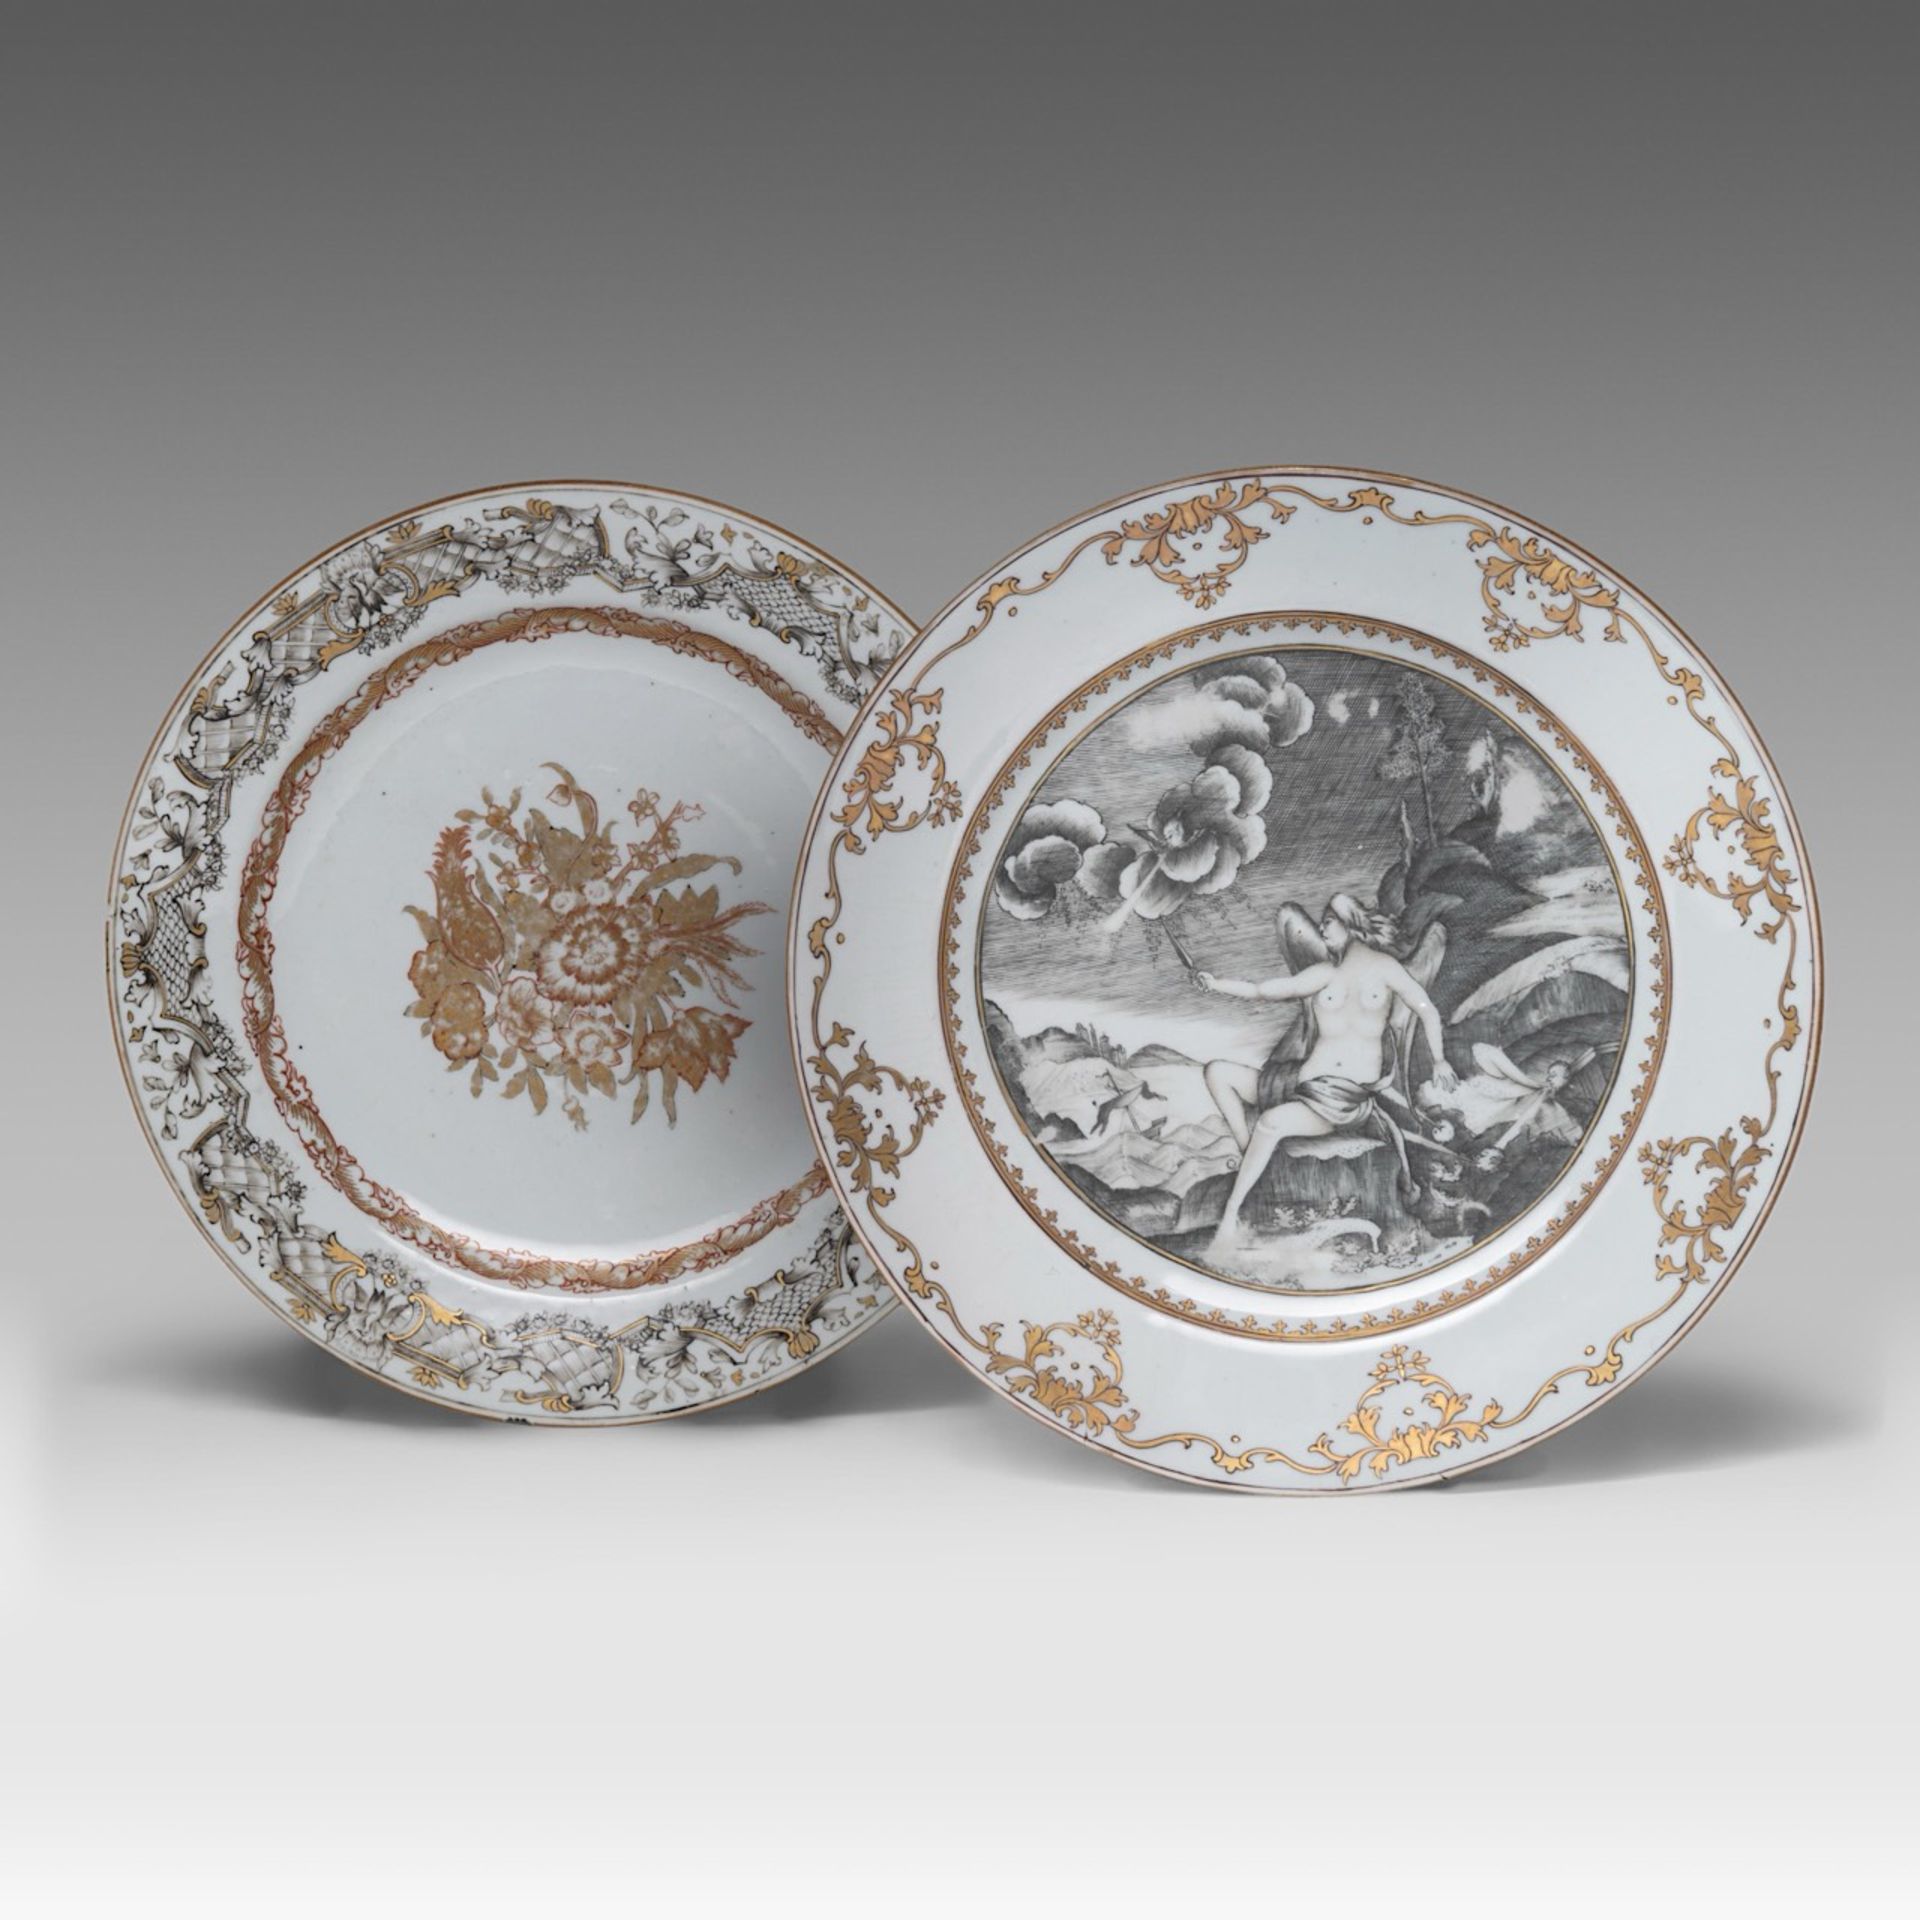 A Chinese export porcelain grisaille 'Mythological subject' dish, 18thC, dia 23 cm - added a ditto '